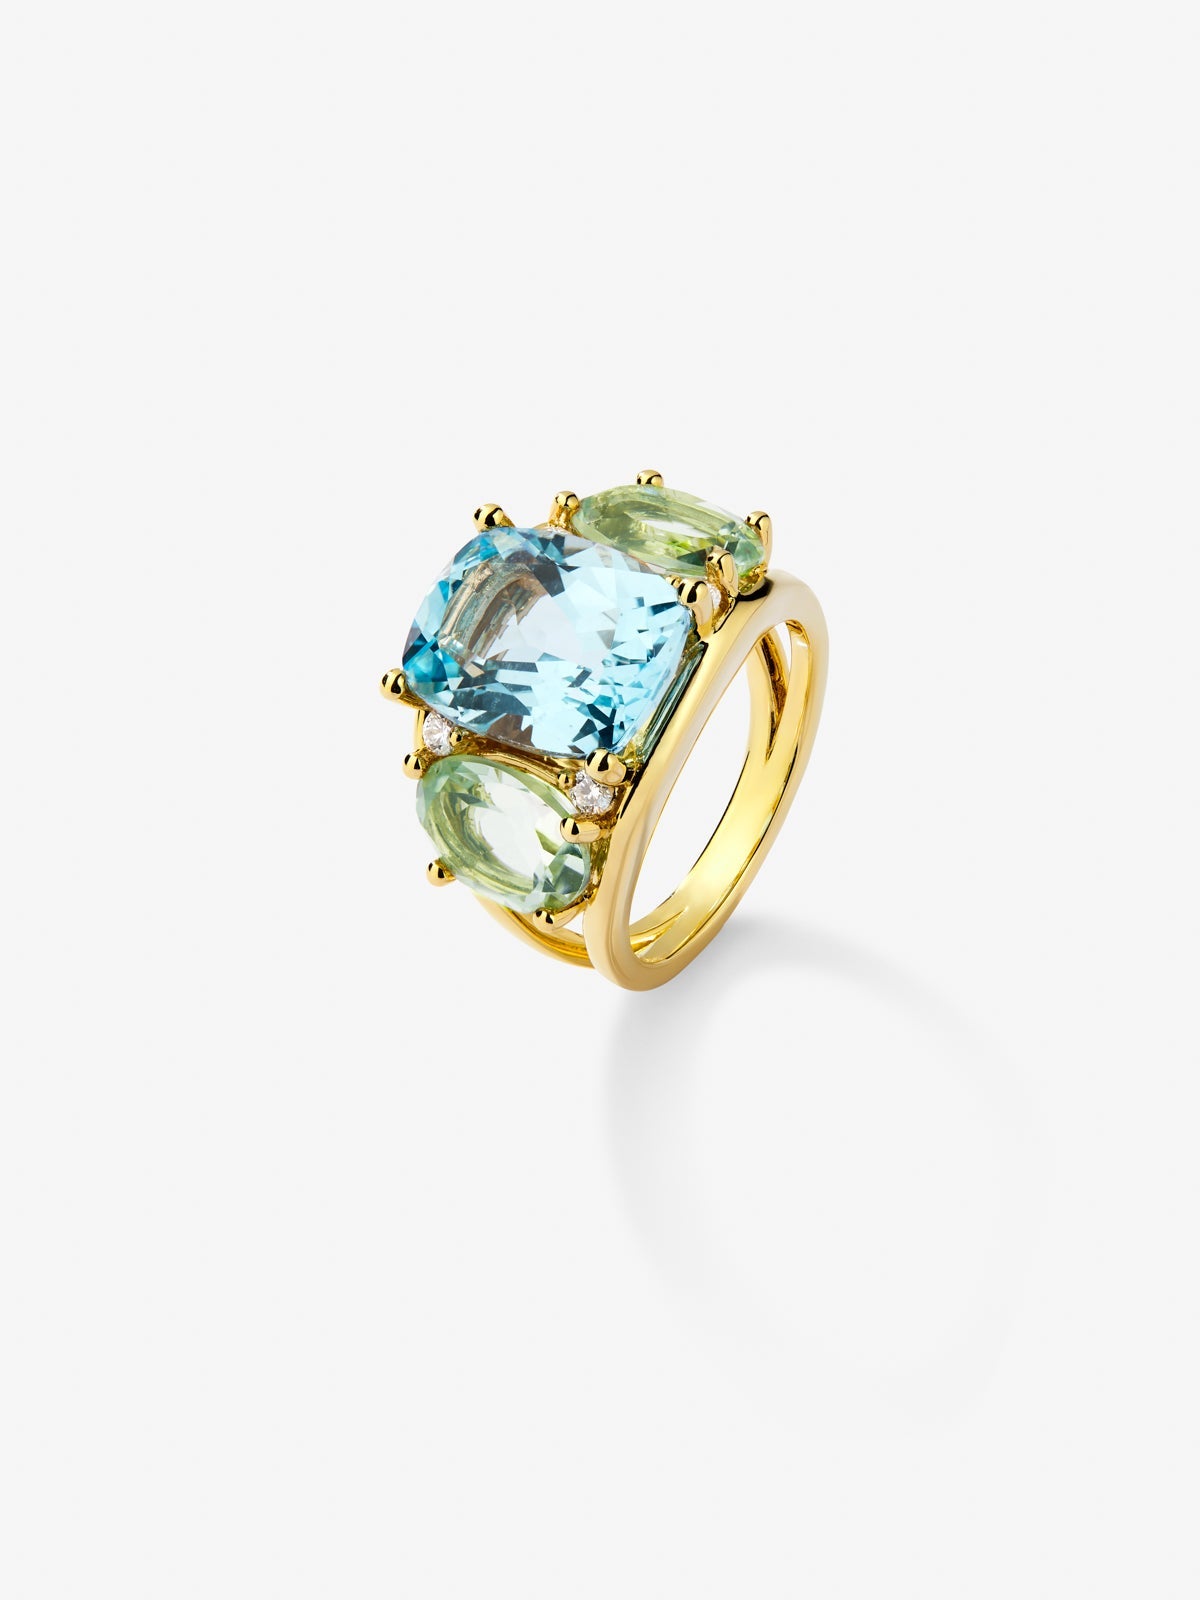 18K yellow gold ring with blue Sky Topacio in 5.5 cts Cushion size, green -sized icatists of 4.65 cts and white diamonds in a brilliant size of 0.15 cts